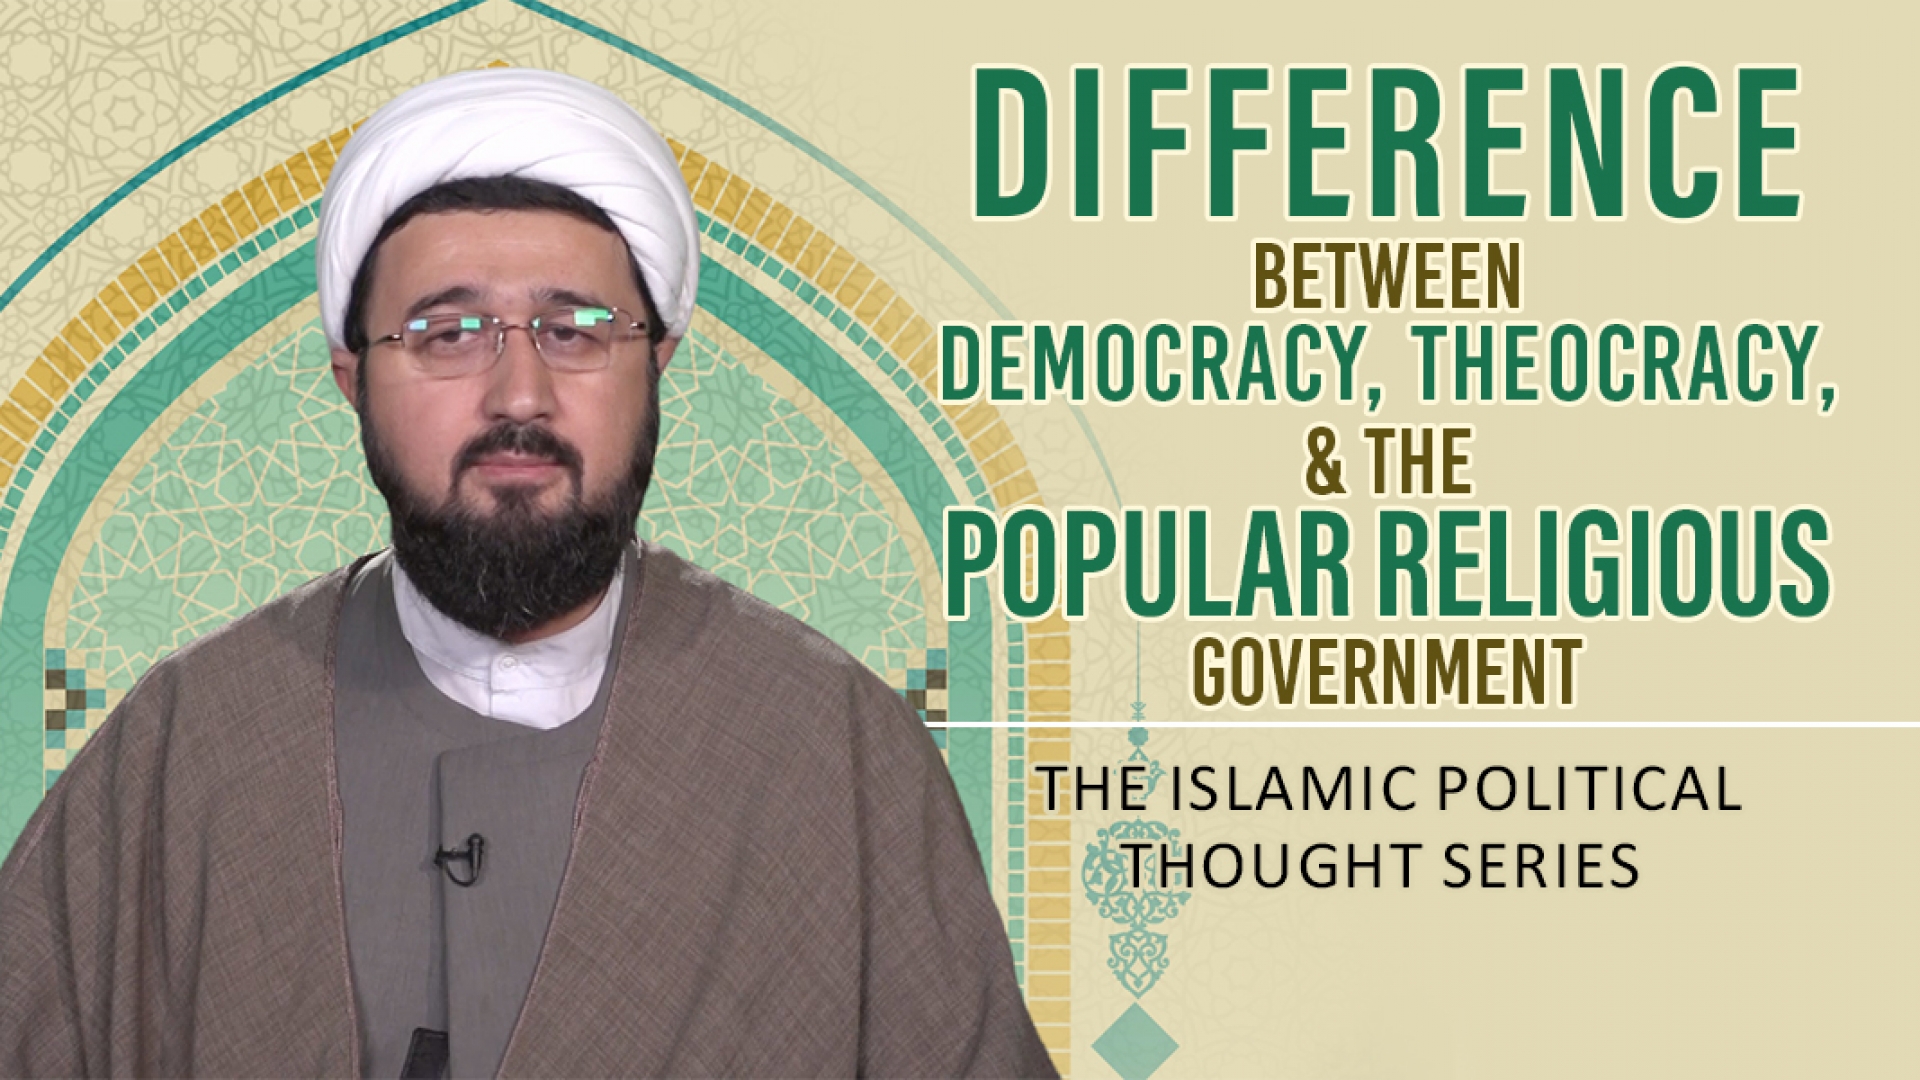 Difference between Democracy, Theocracy, & the Popular Religious Government | The Islamic Political Thought Series